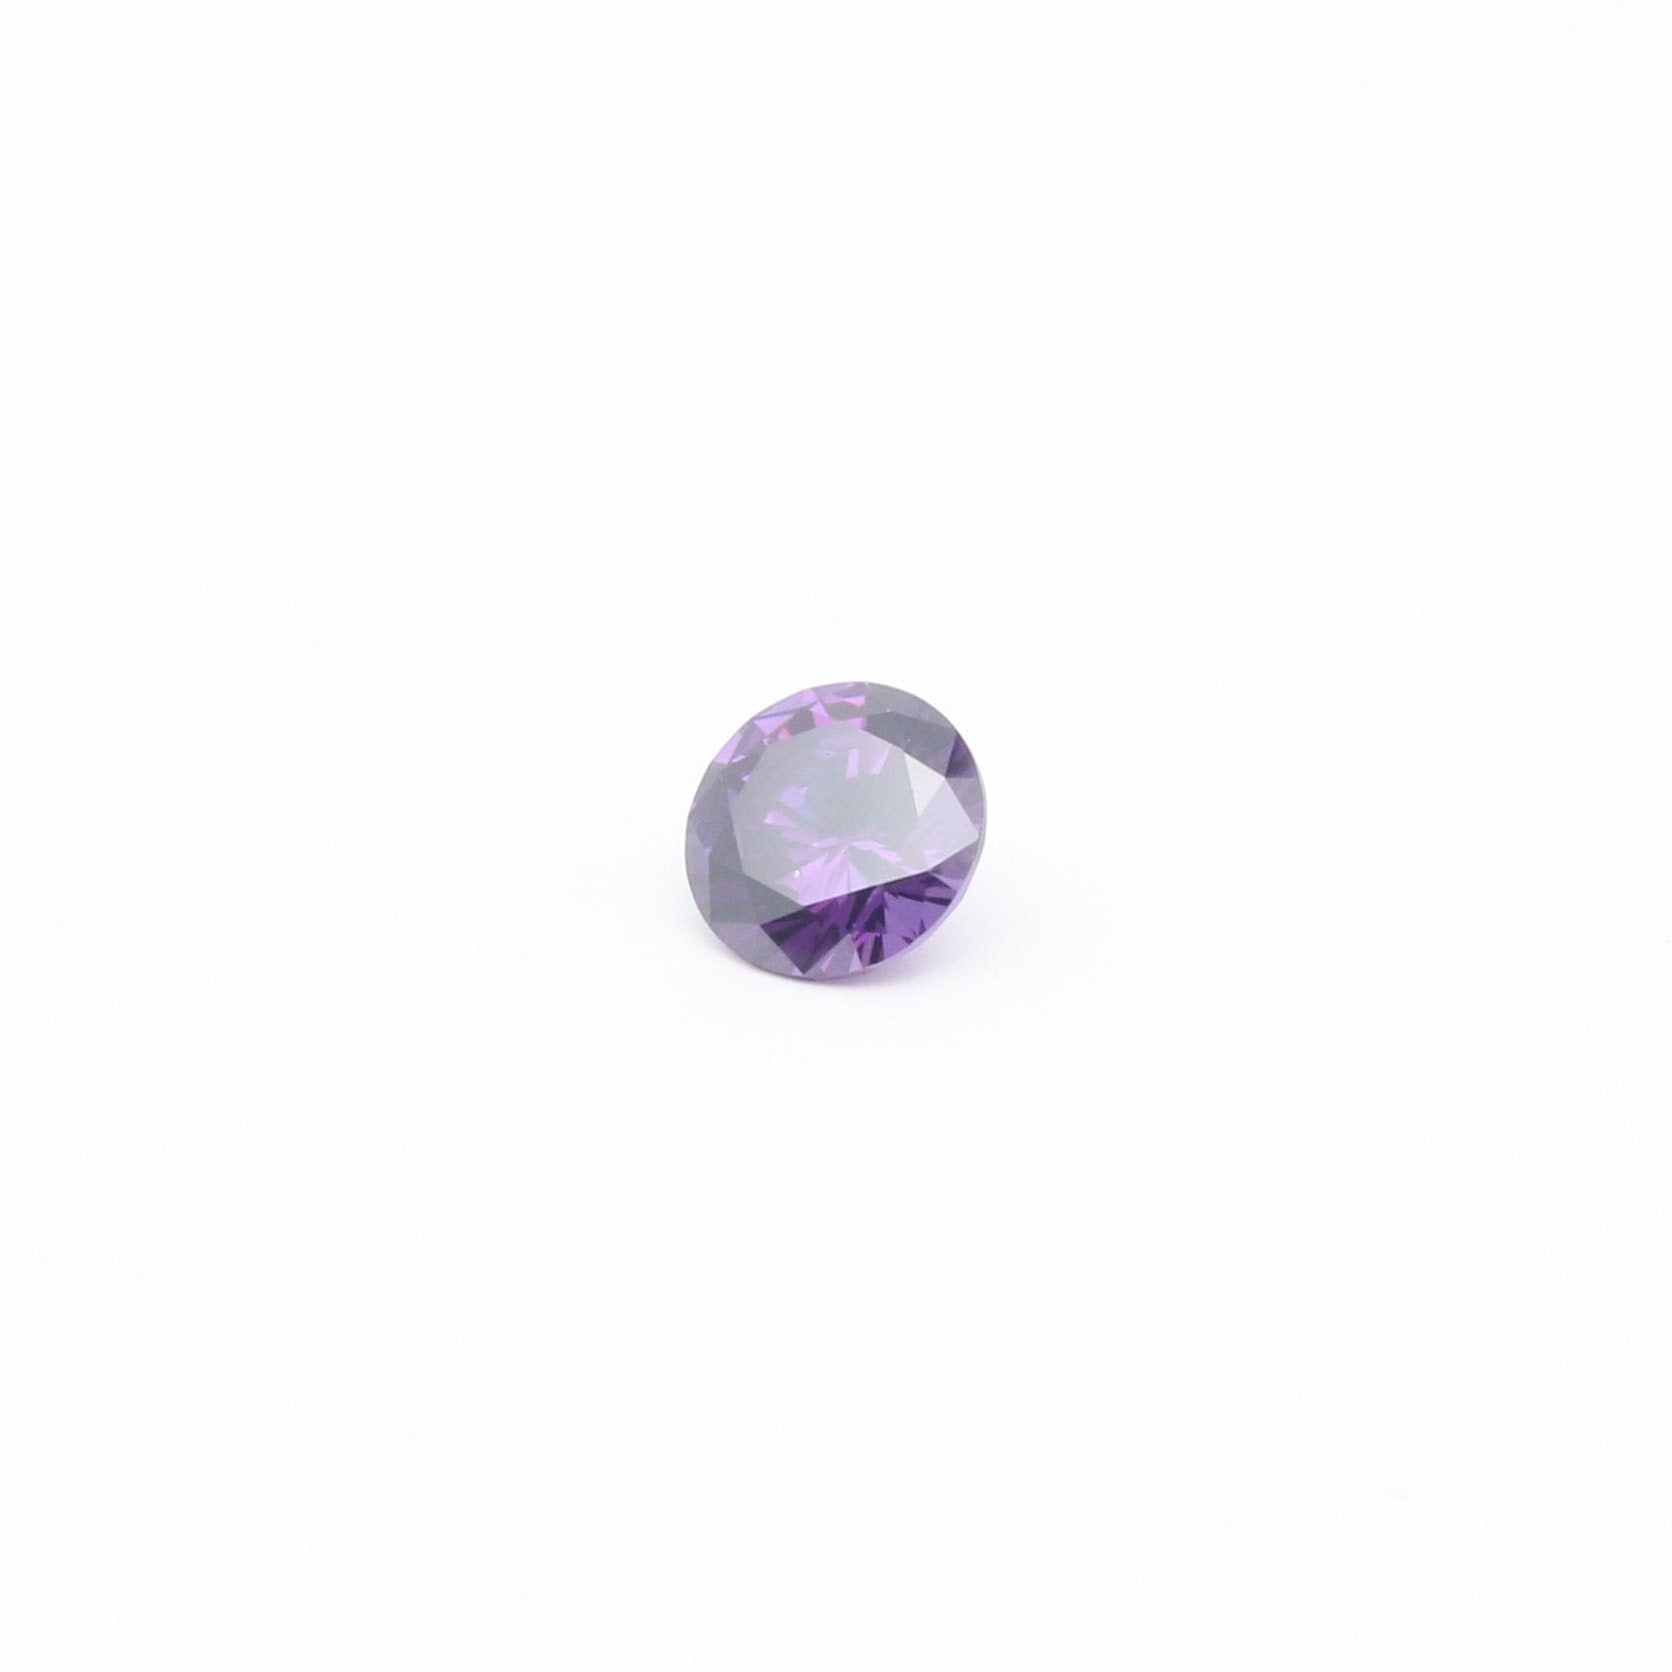 Violet Cubic Zirconia Faceting Rough for Gem Cutting - Various Sizes